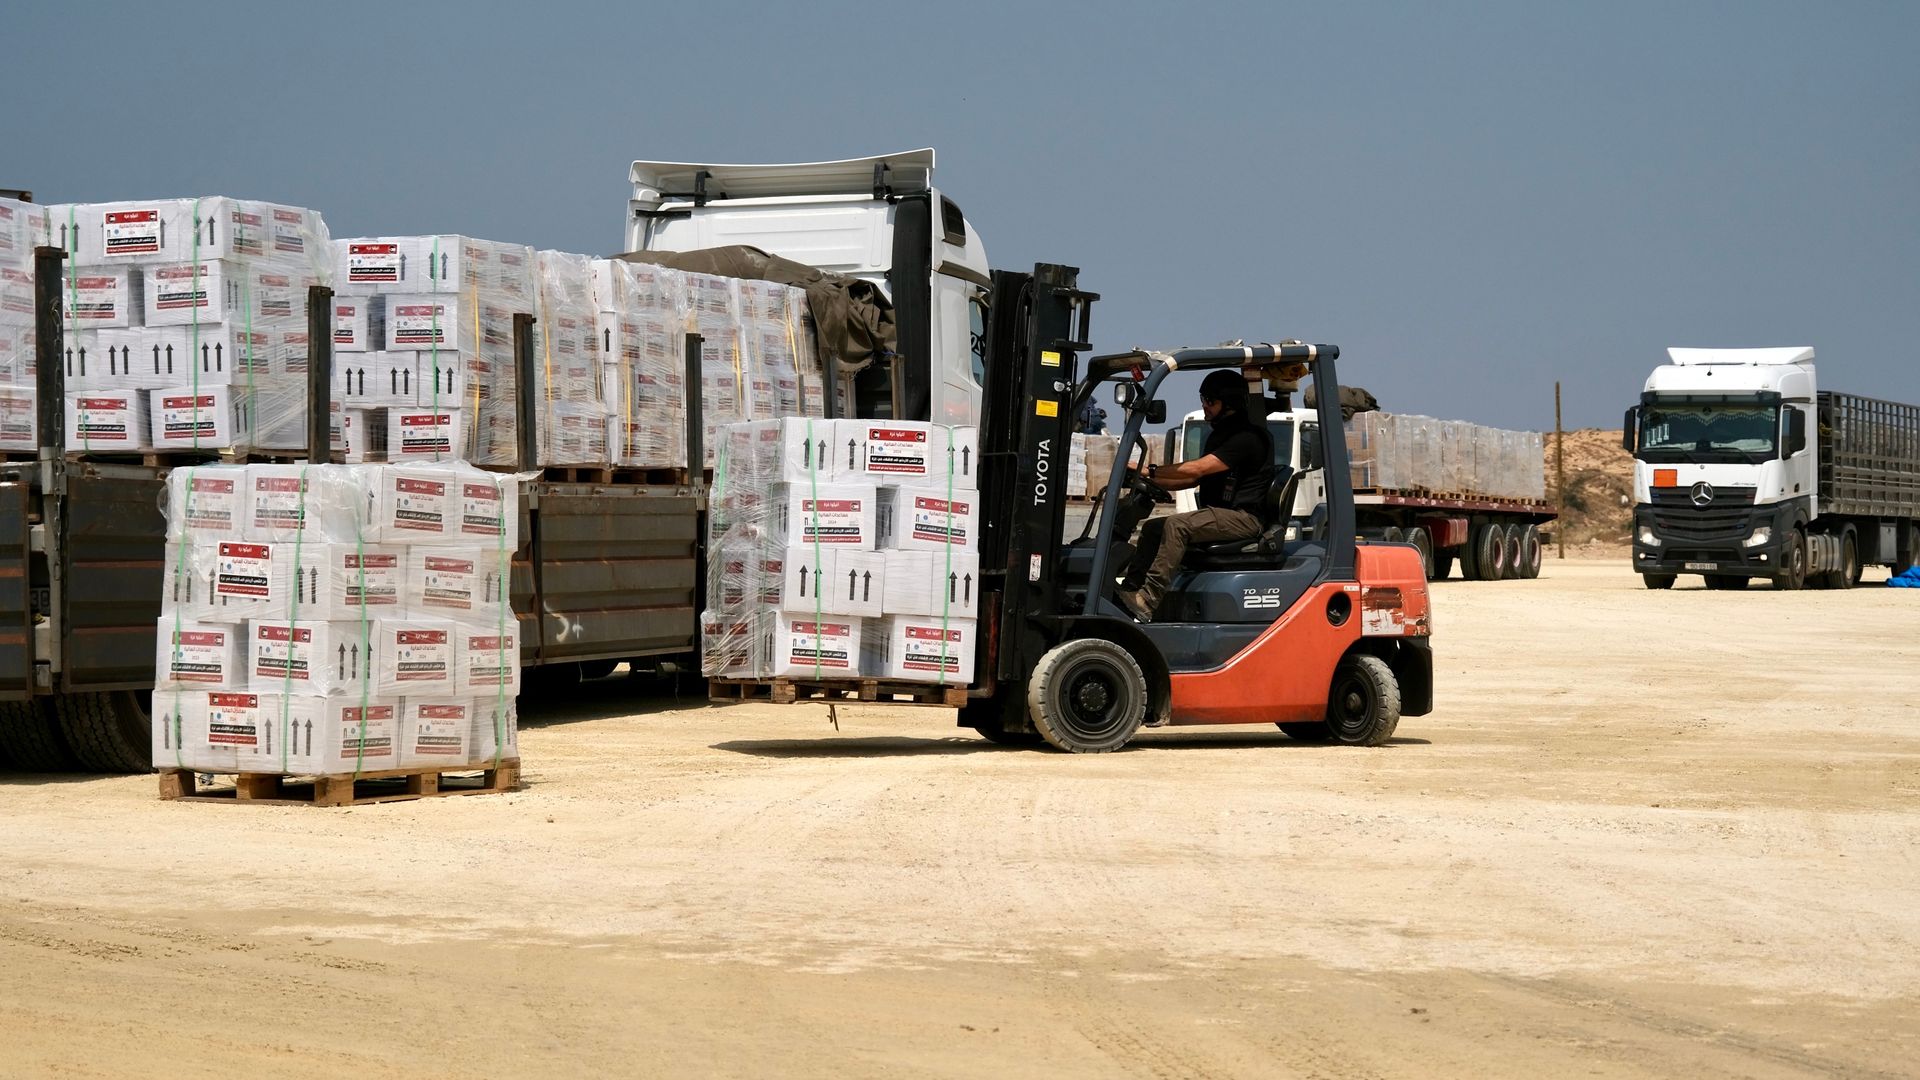 Aid passes through Gaza's 'lifeline' northern crossing for first time